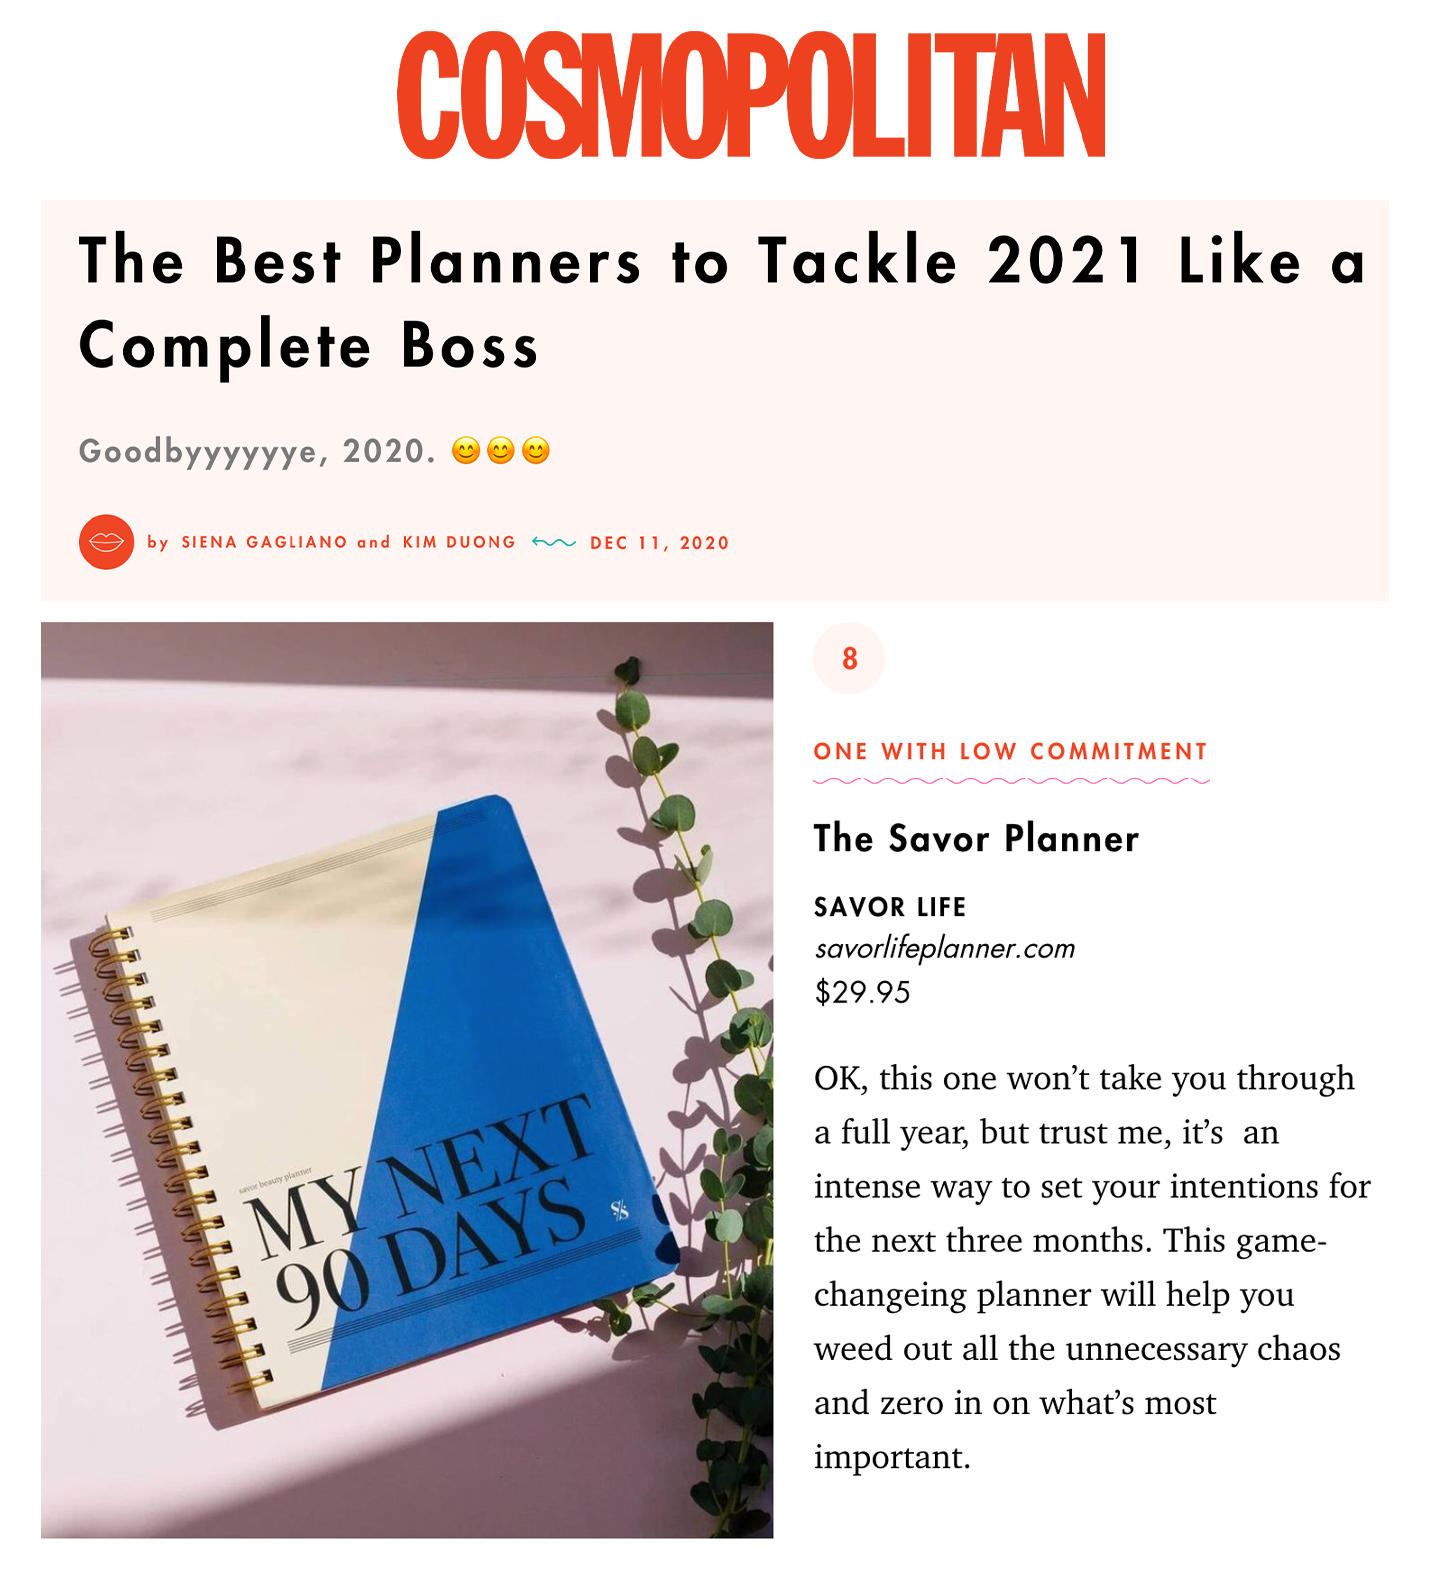 Cosmopolitan: The Best Planners to Tackle 2021